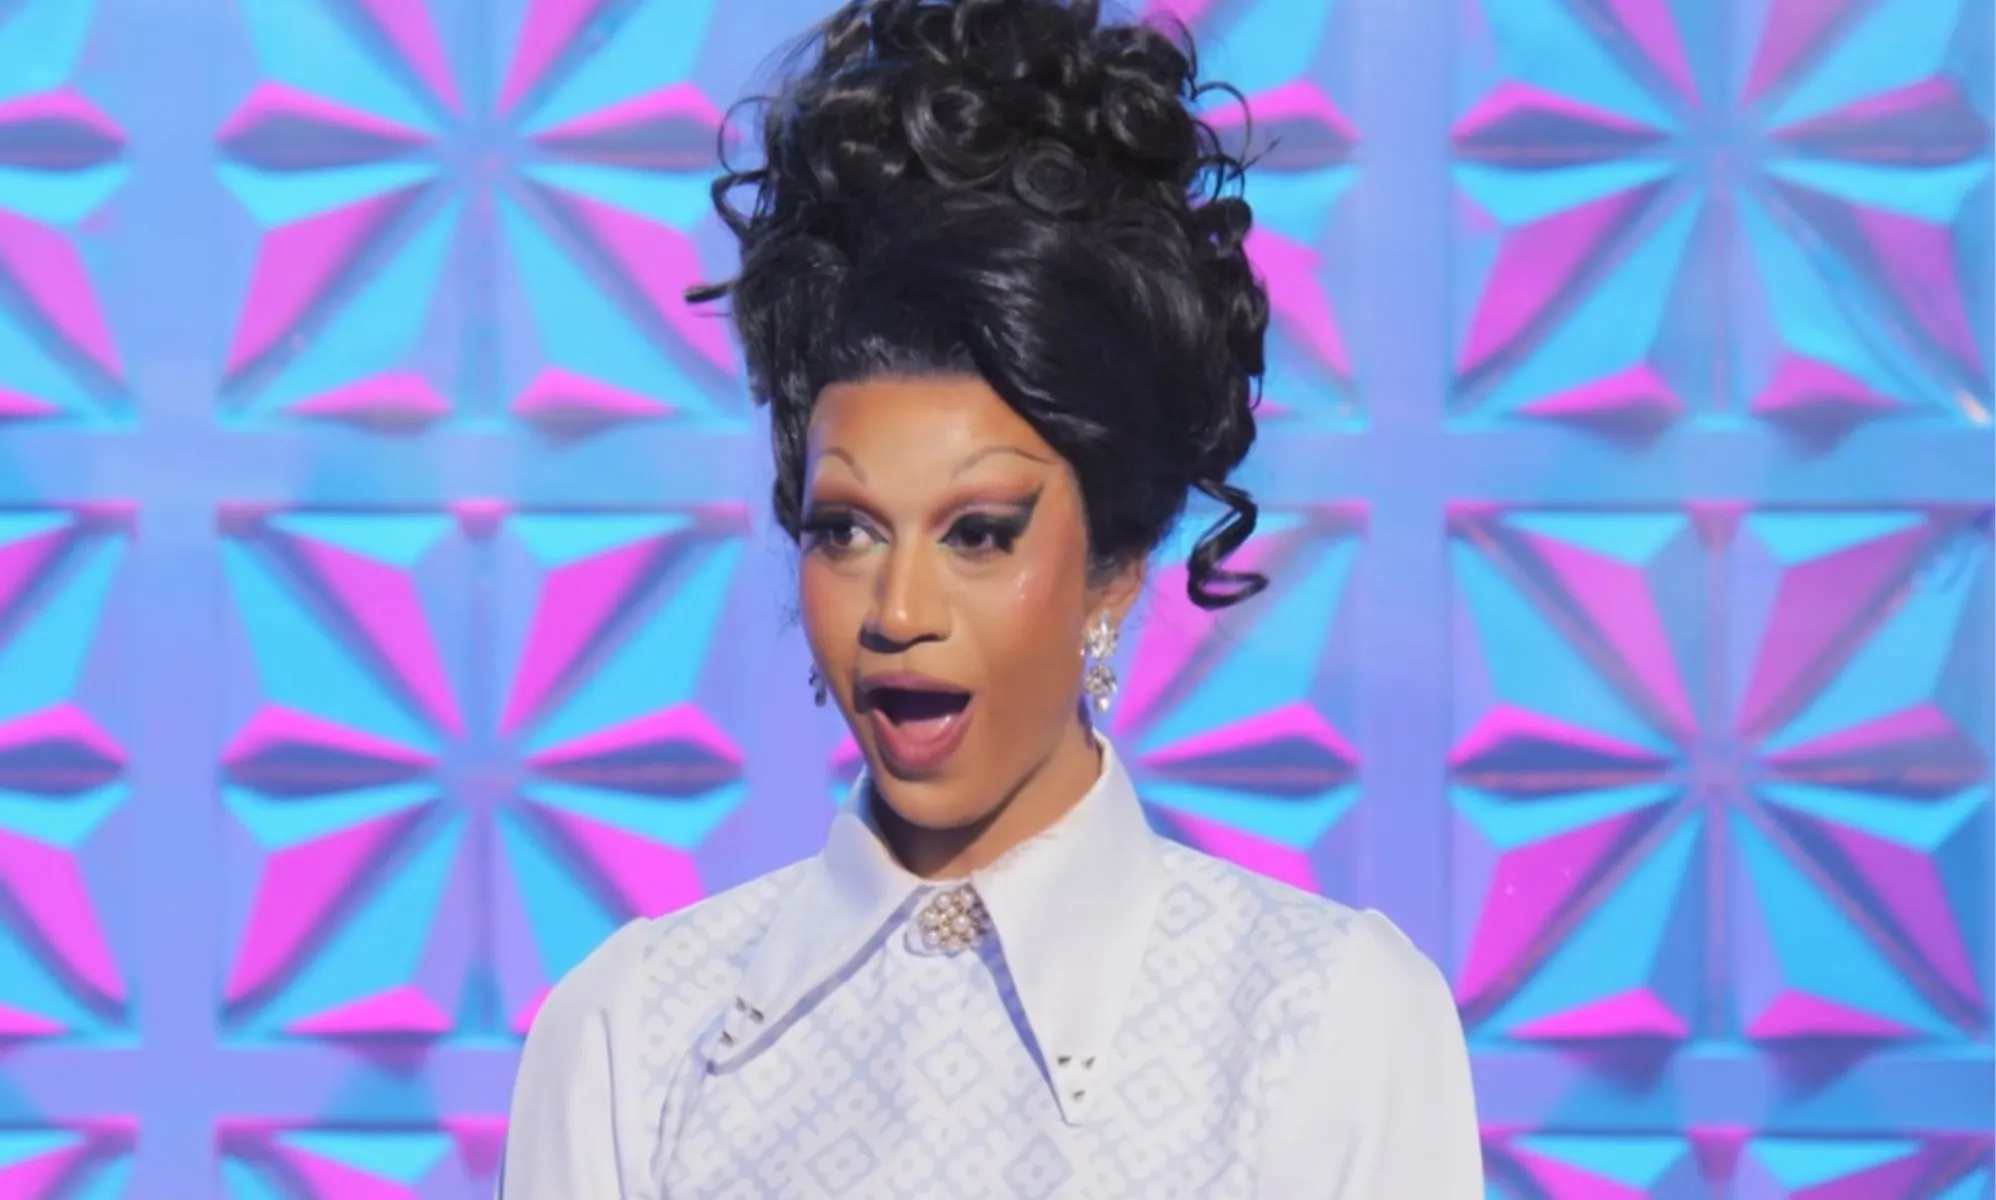 ‘Drag Race is meant to be fun – but toxic fans are ruining it for everyone’